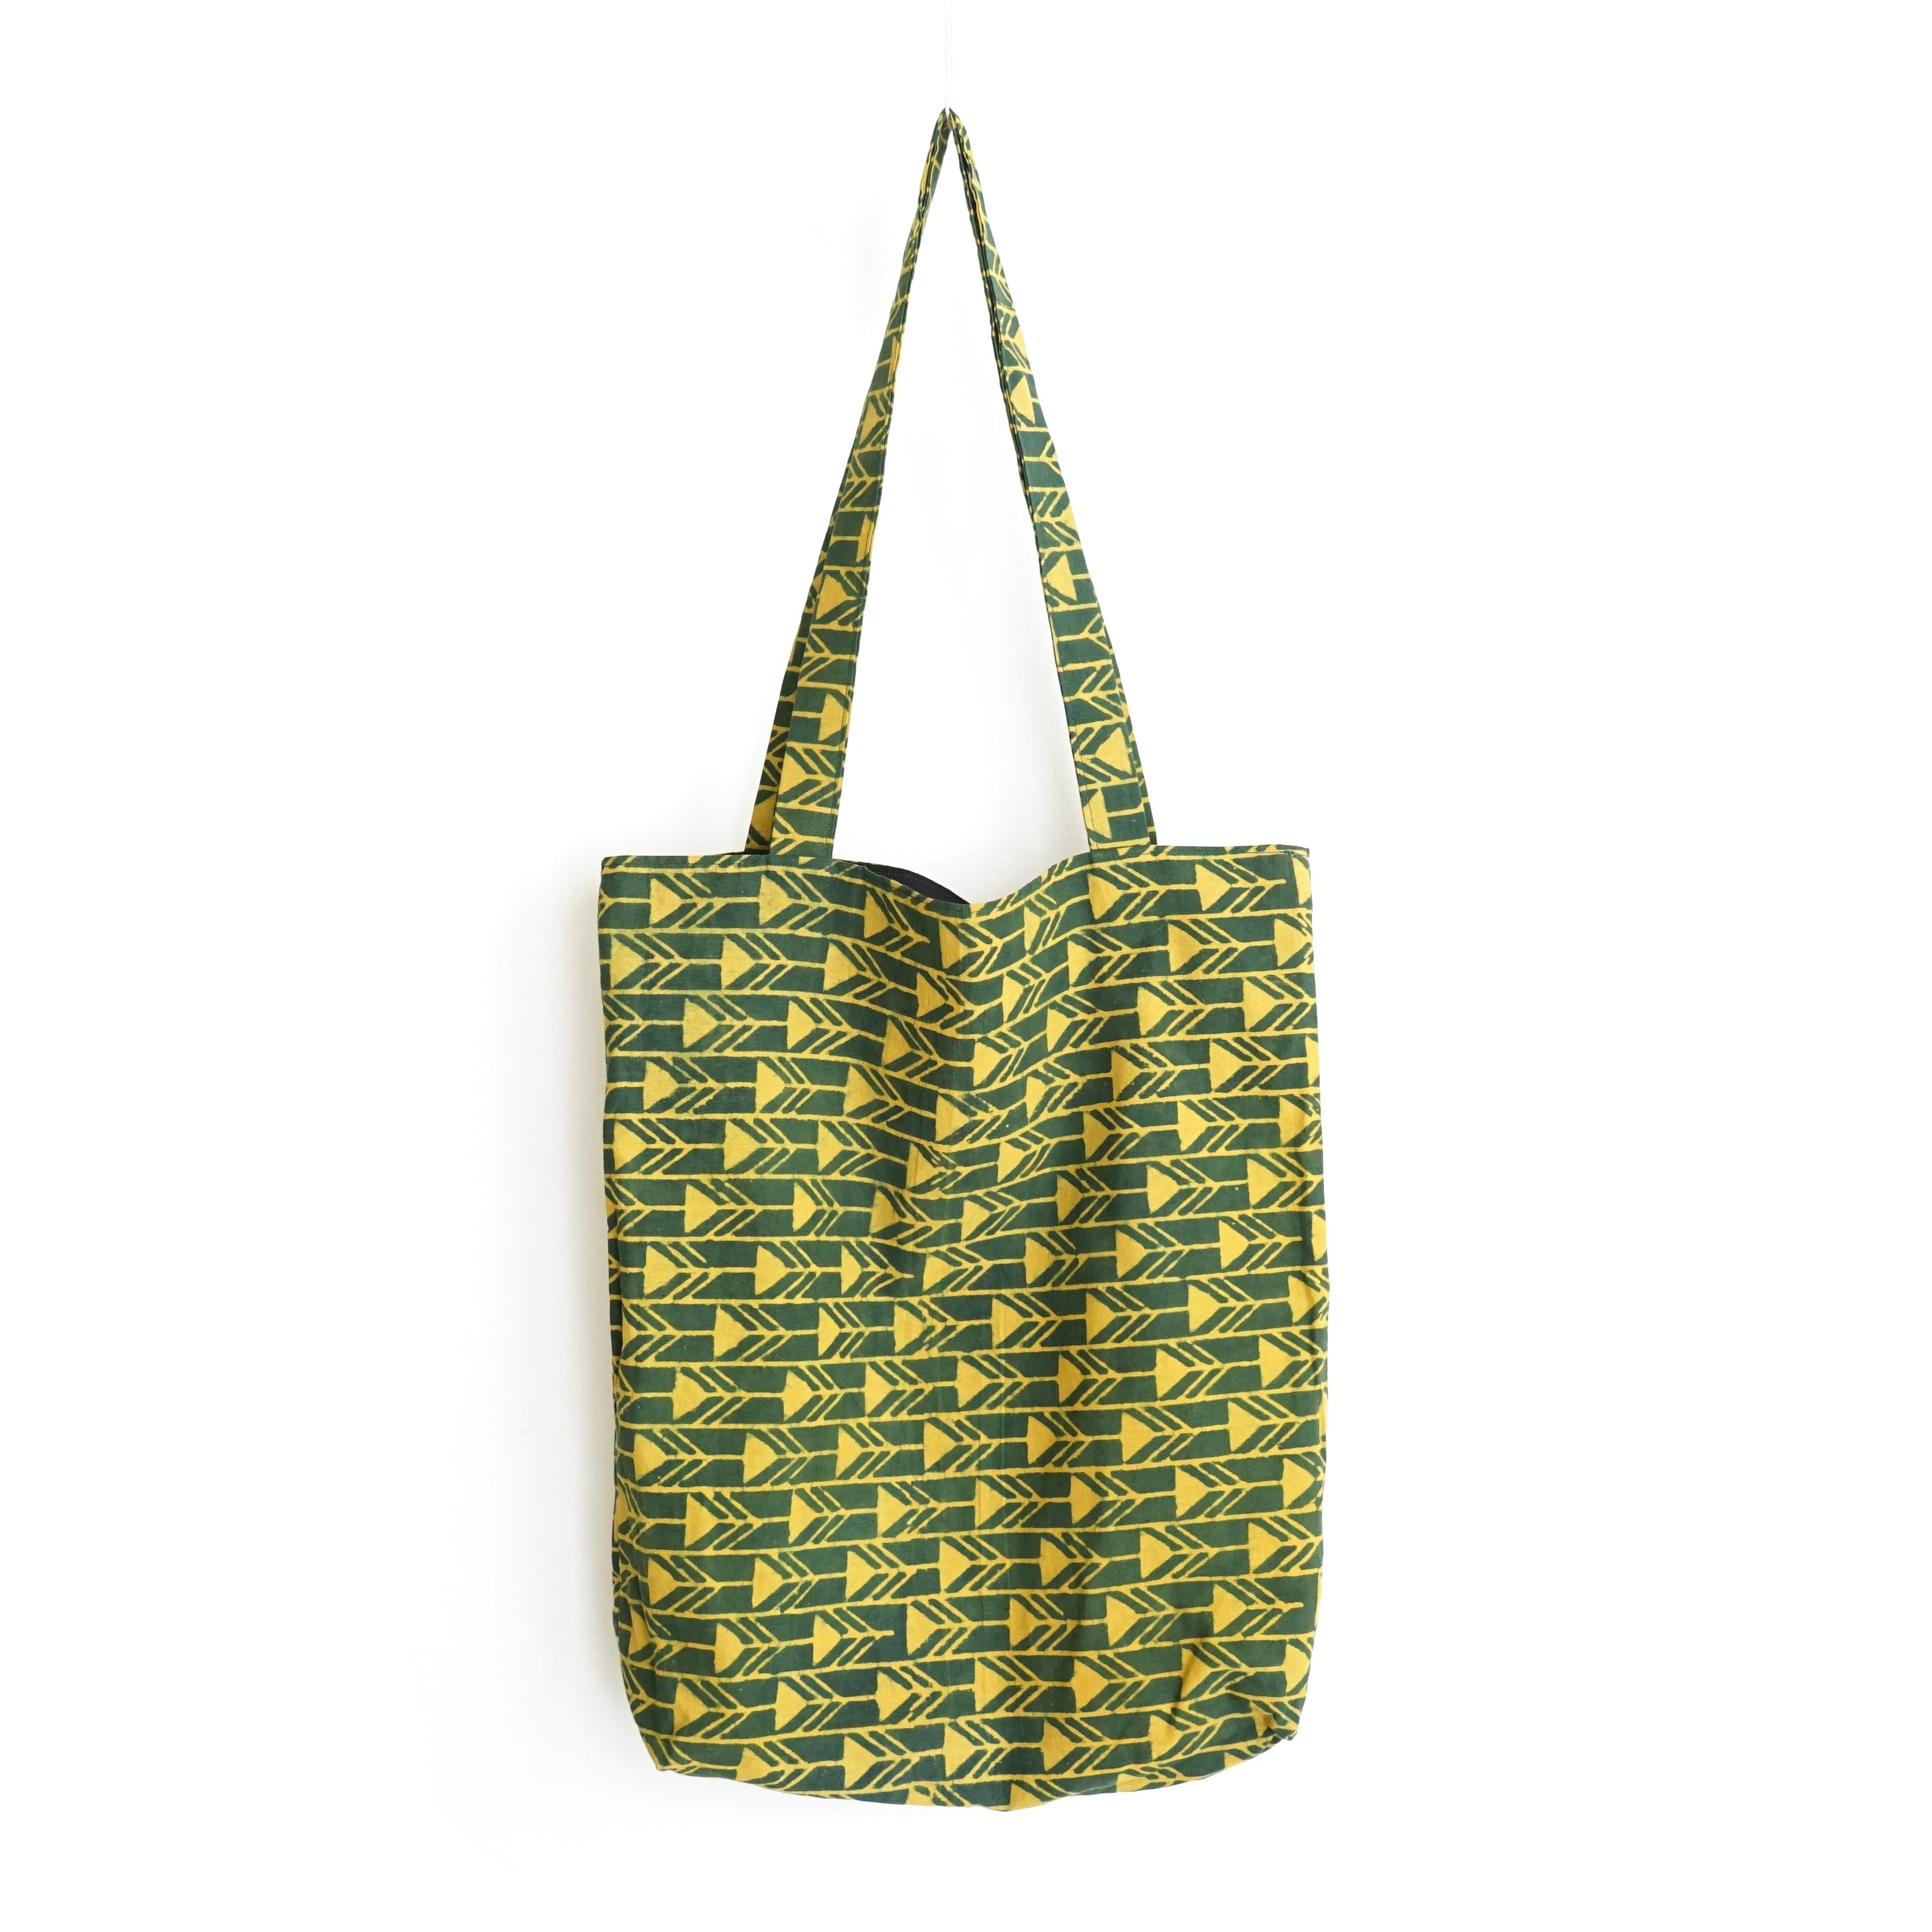 block printed cotton tote bag, green, yellow arrow design, natural dye, lined with black cotton, closed